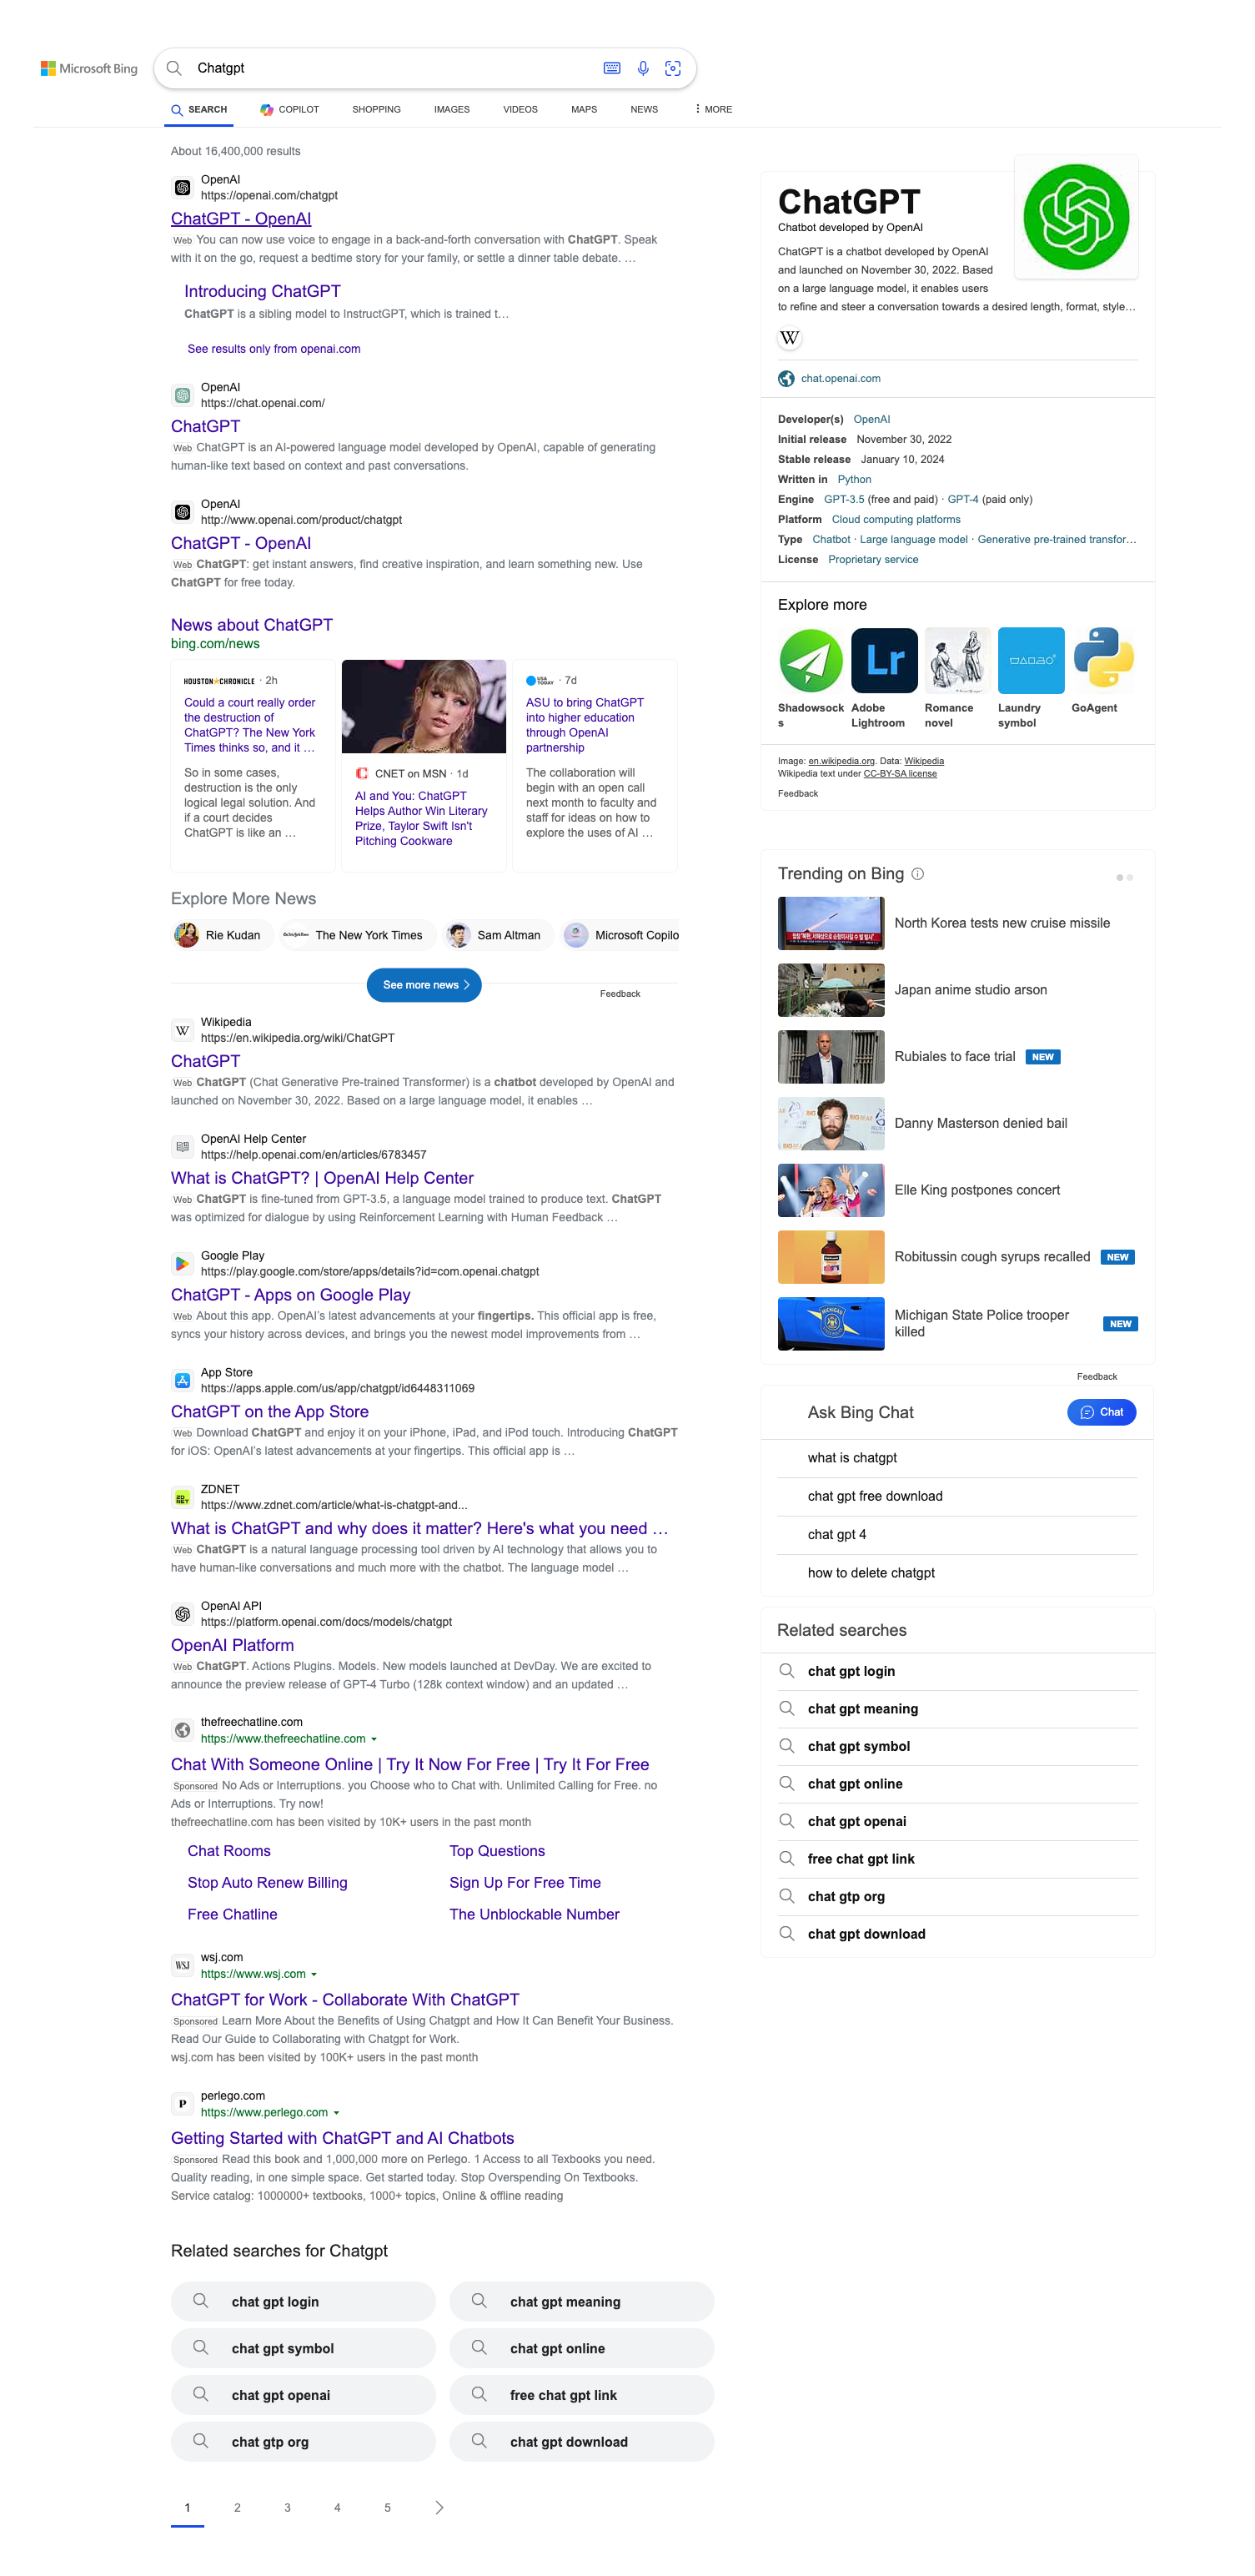 Extensive Bing Search Results